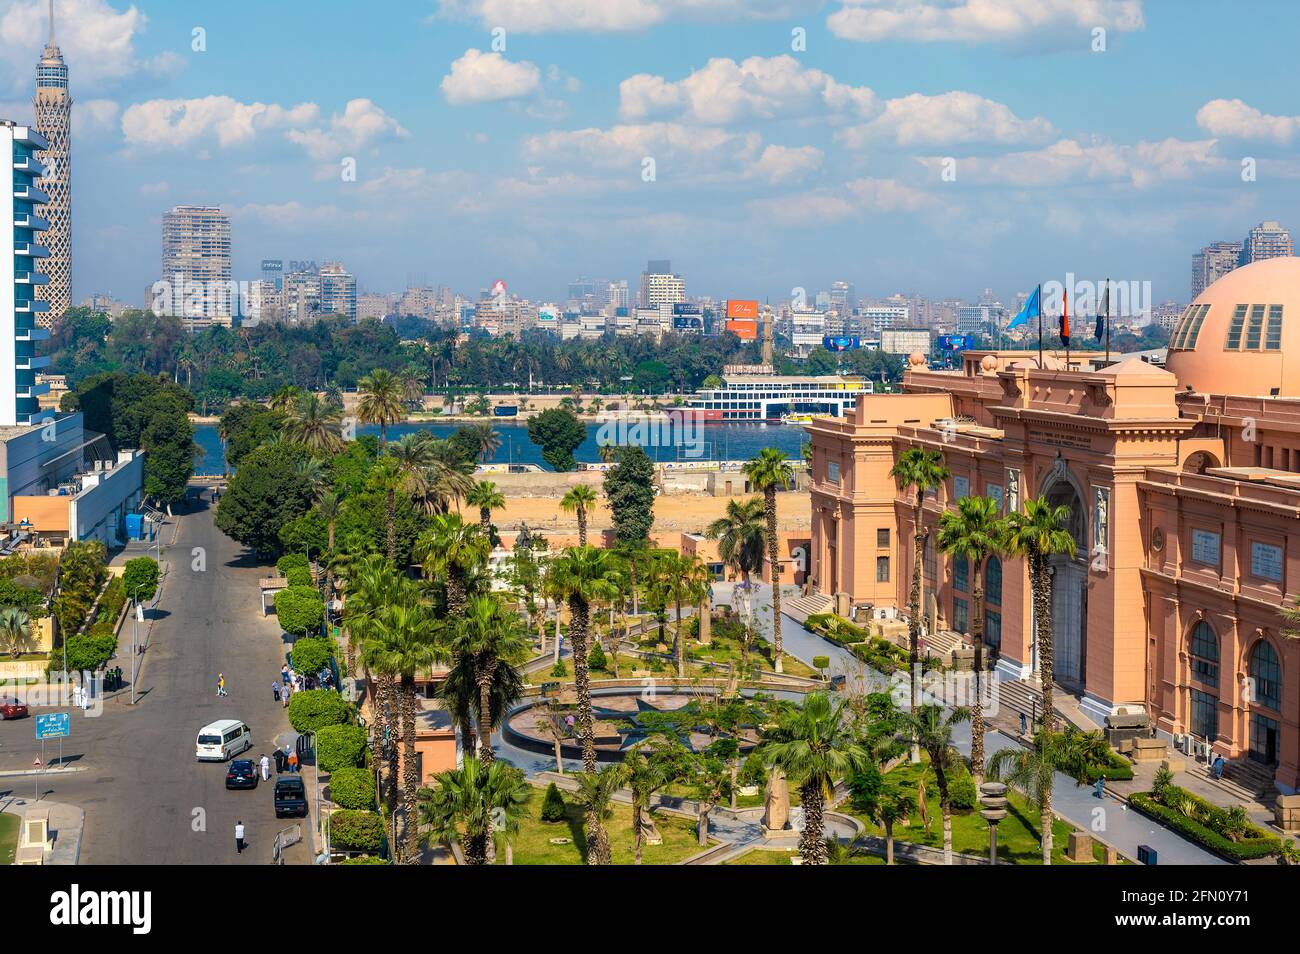 CAIRO, EGYPT - MAY 11, 2021 : Cairo Museum Of Egyptology And Antiquities. aerial view of Facade of the Egyptian Museum in Cairo and the Nile River Stock Photo